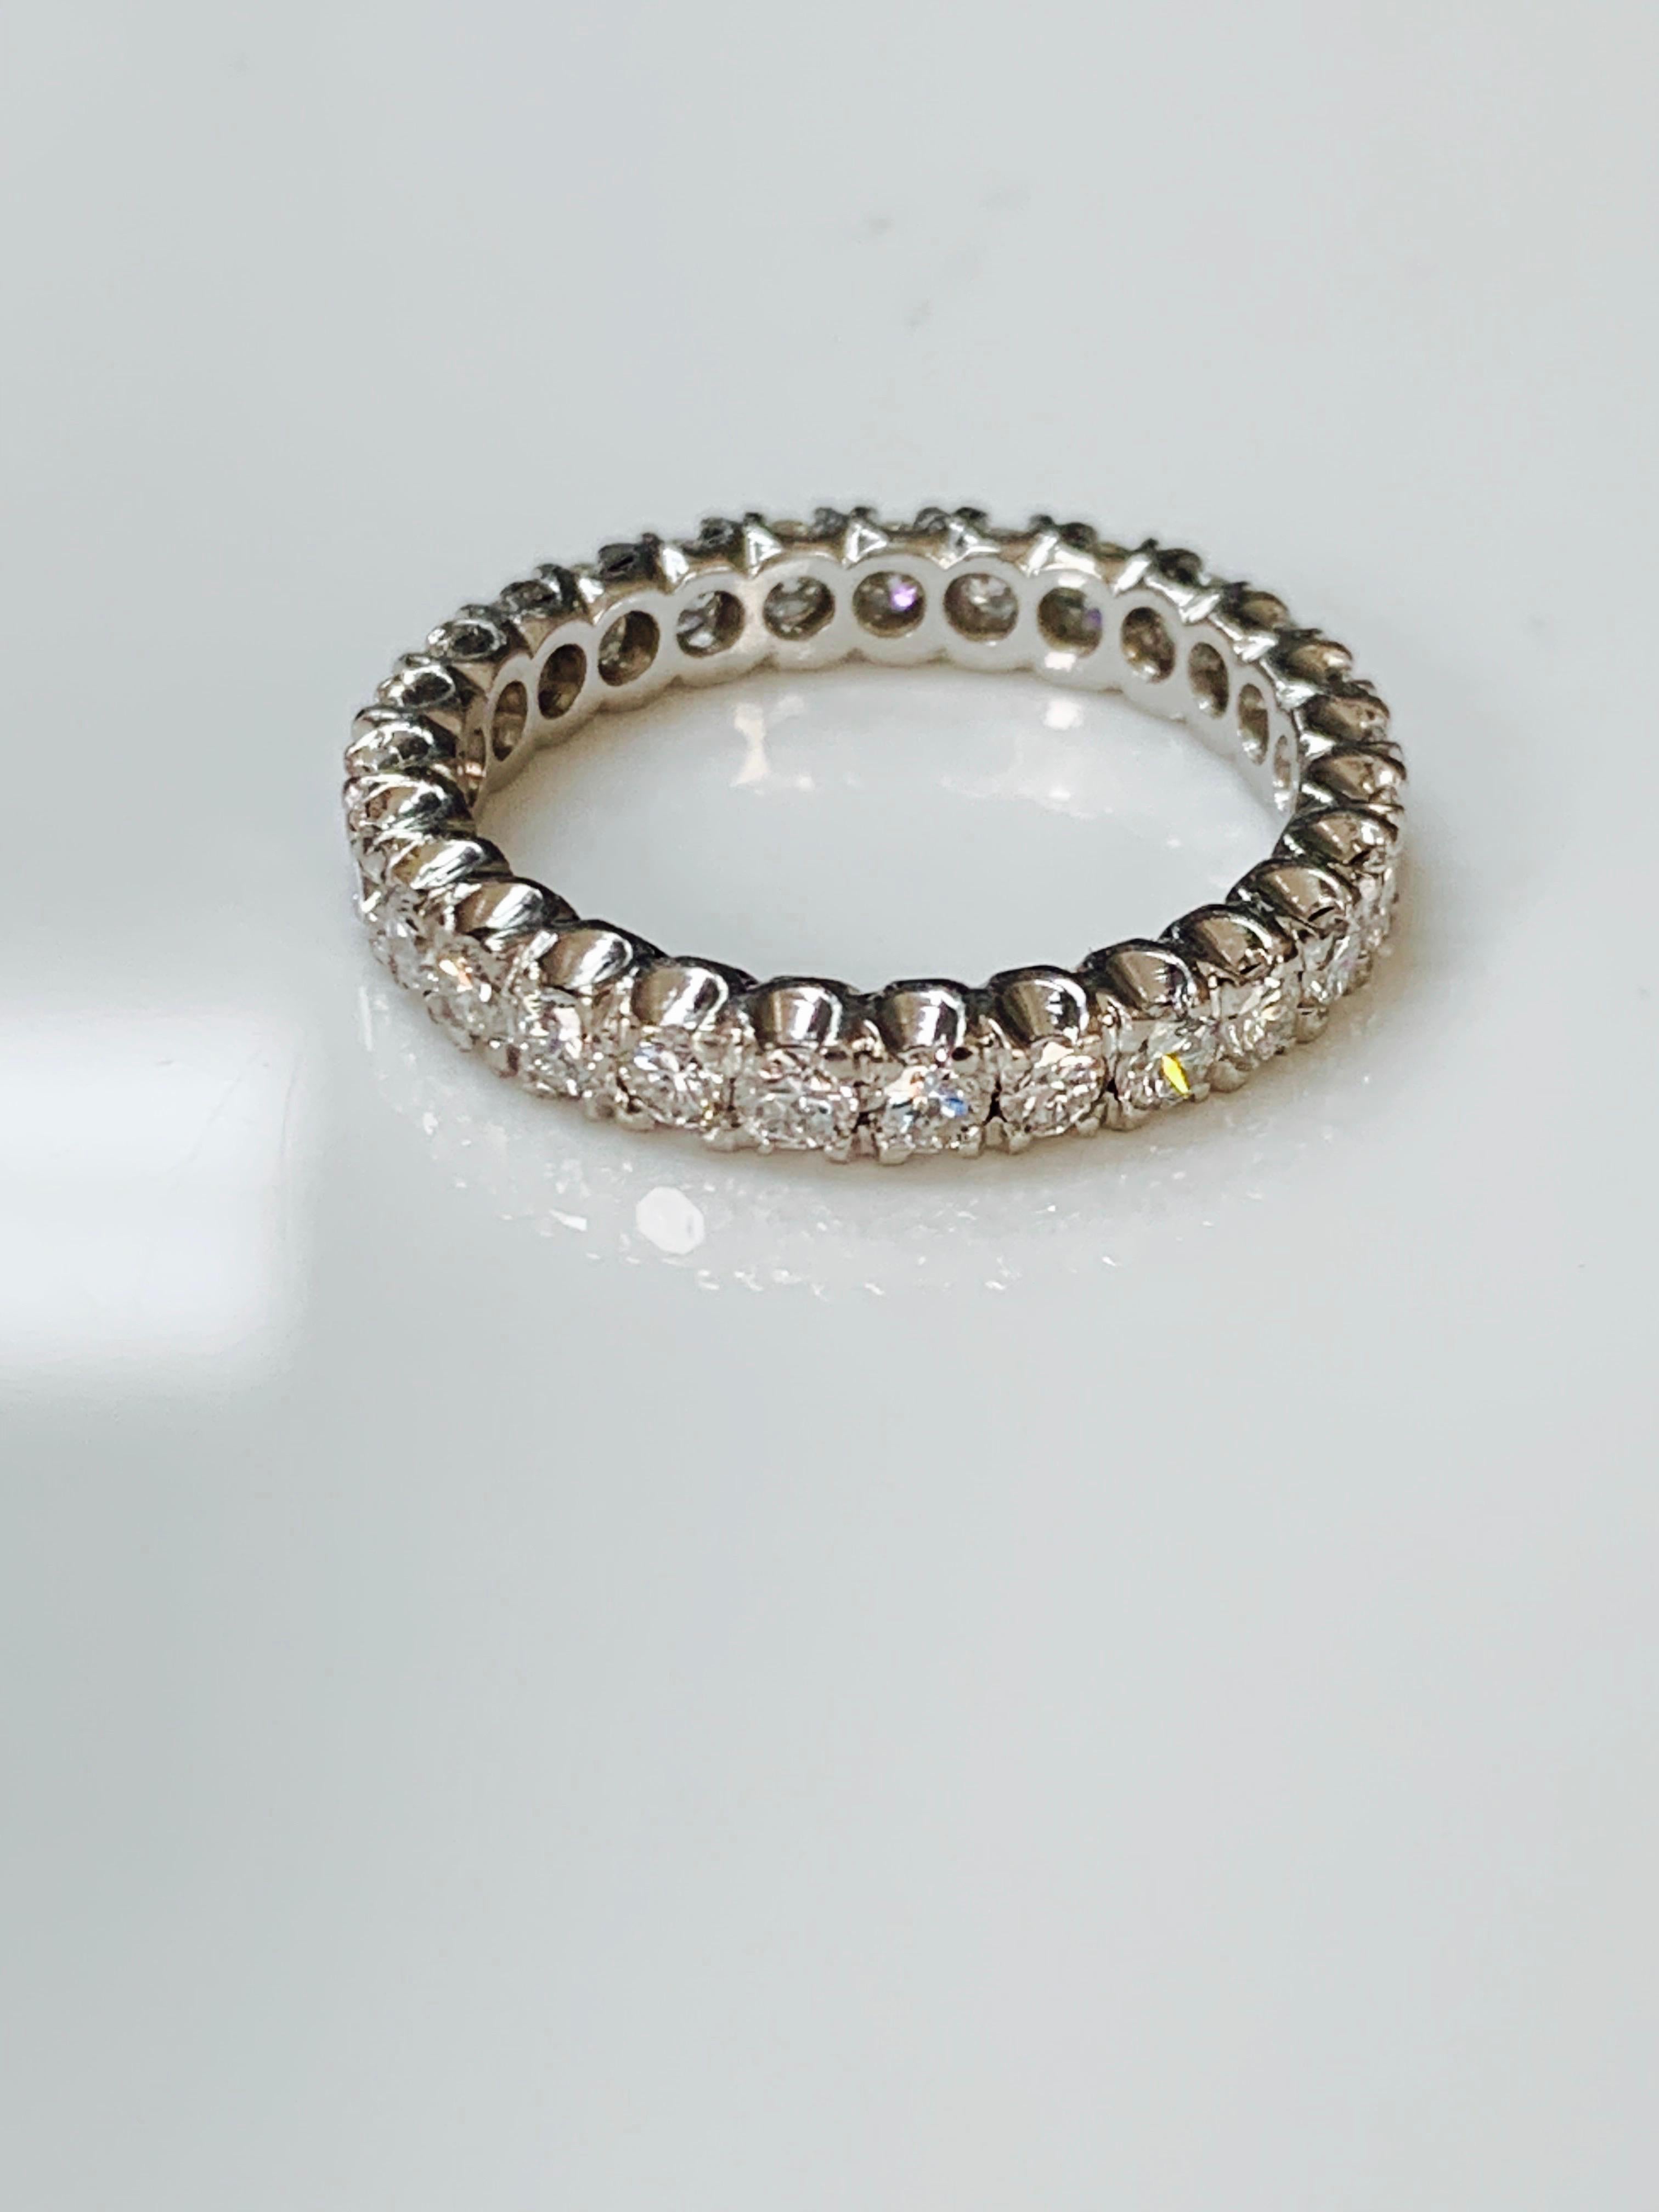 Beautifully handmade 1 carat round brilliant diamond eternity band in white gold. 
The details are as follows :
Diamond weight : 1 carat 
Metal : 18 k white gold 
Ring size : 6
